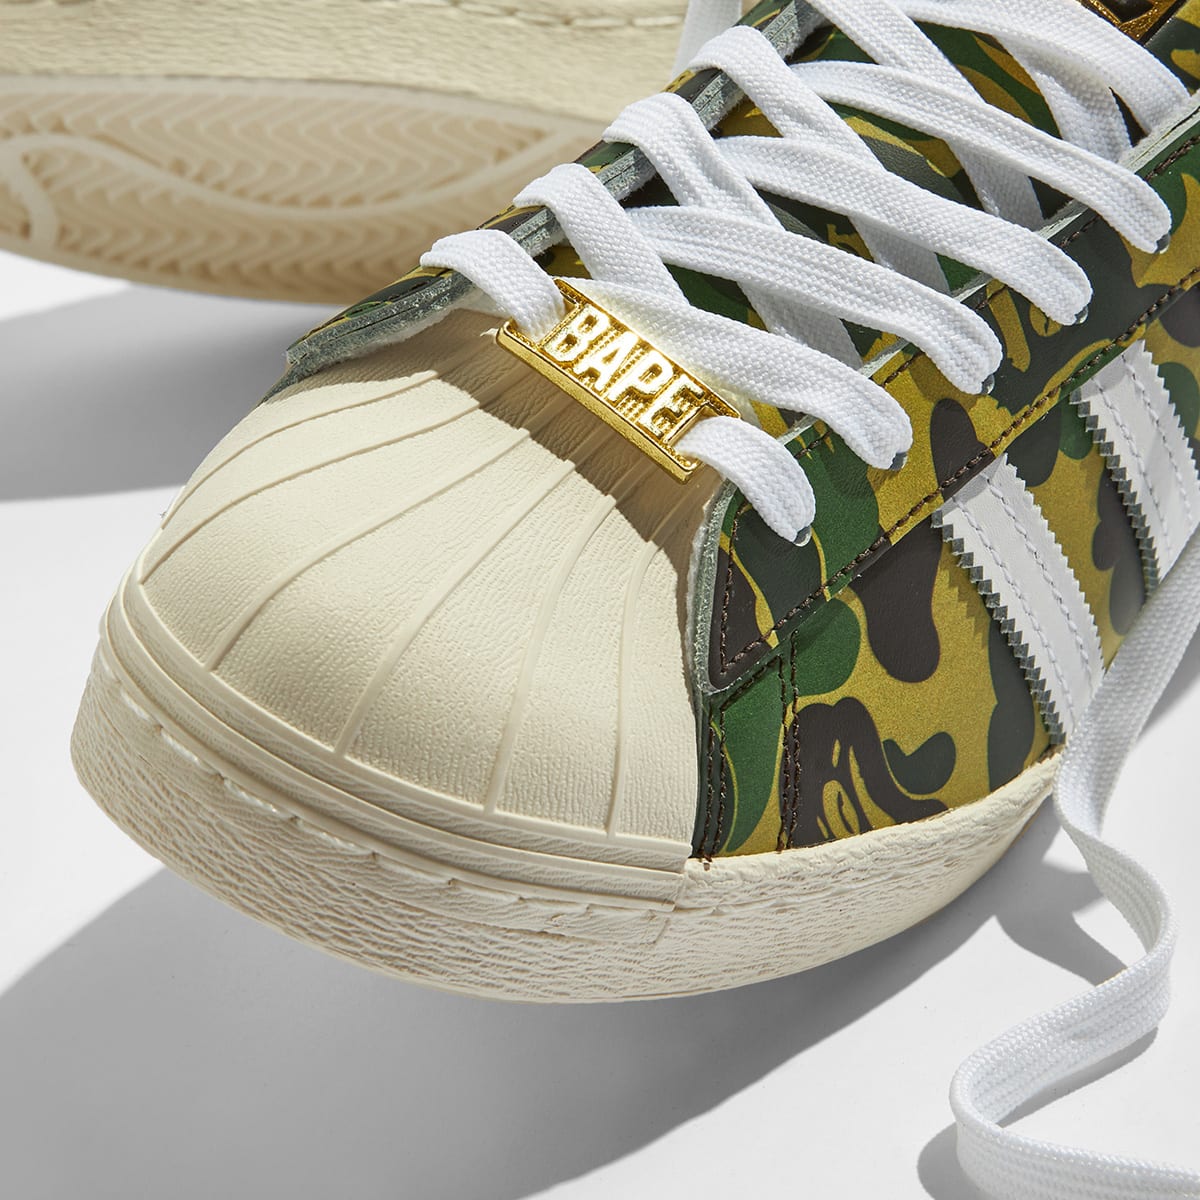 opwinding indruk Proportioneel Adidas x A Bathing Ape Superstar 80's (Green Camo, White & Off White) |  END. Launches